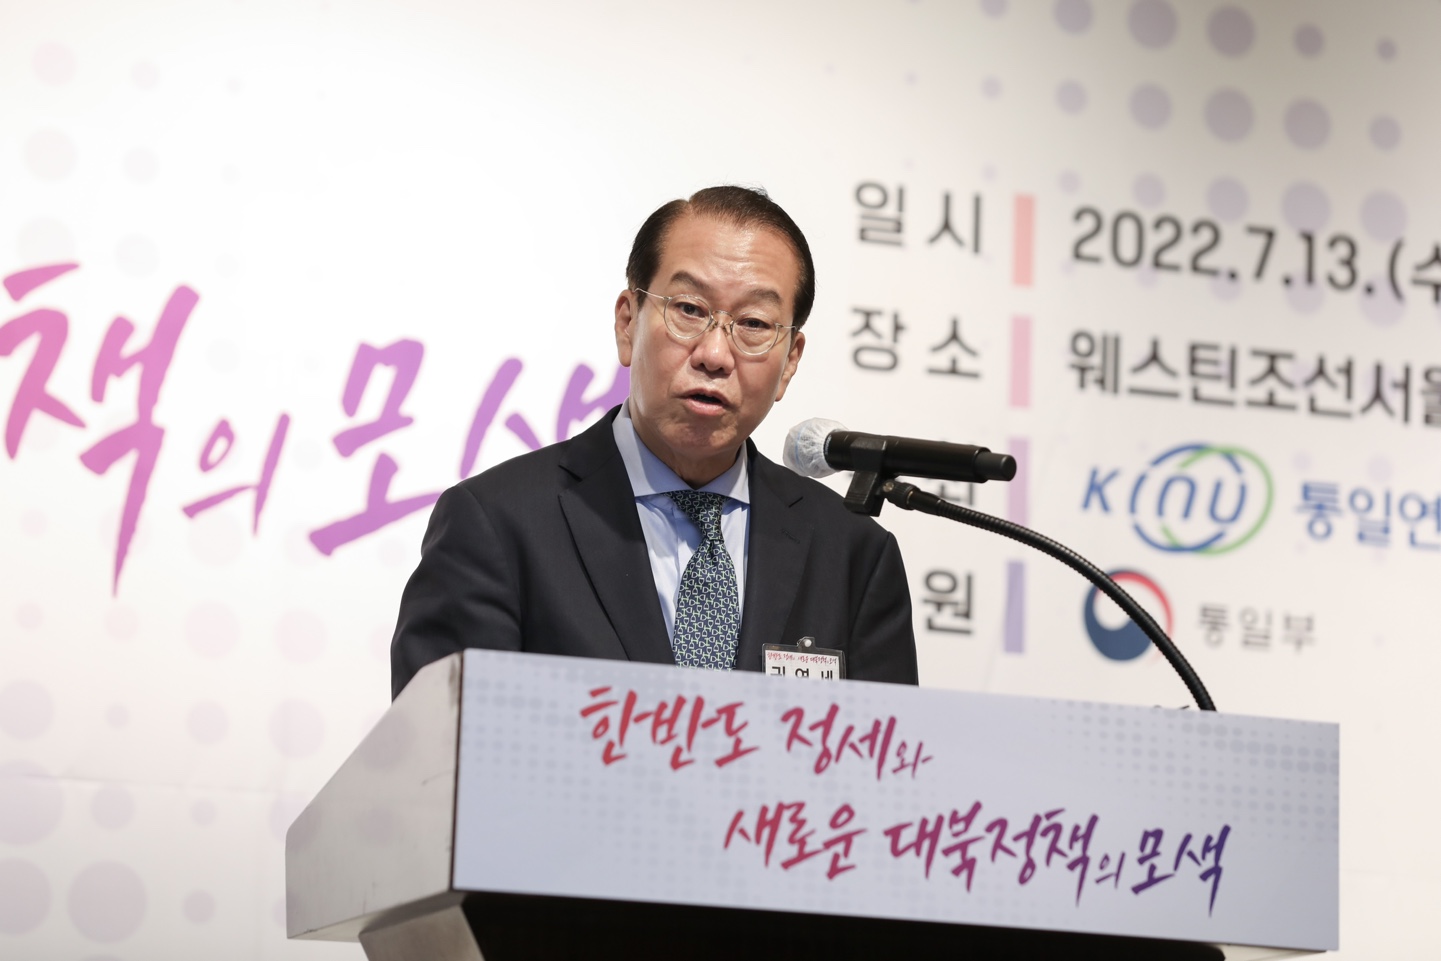 Unification Minister Kwon Youngse Delivers Congratulatory Remarks at Academic Conference